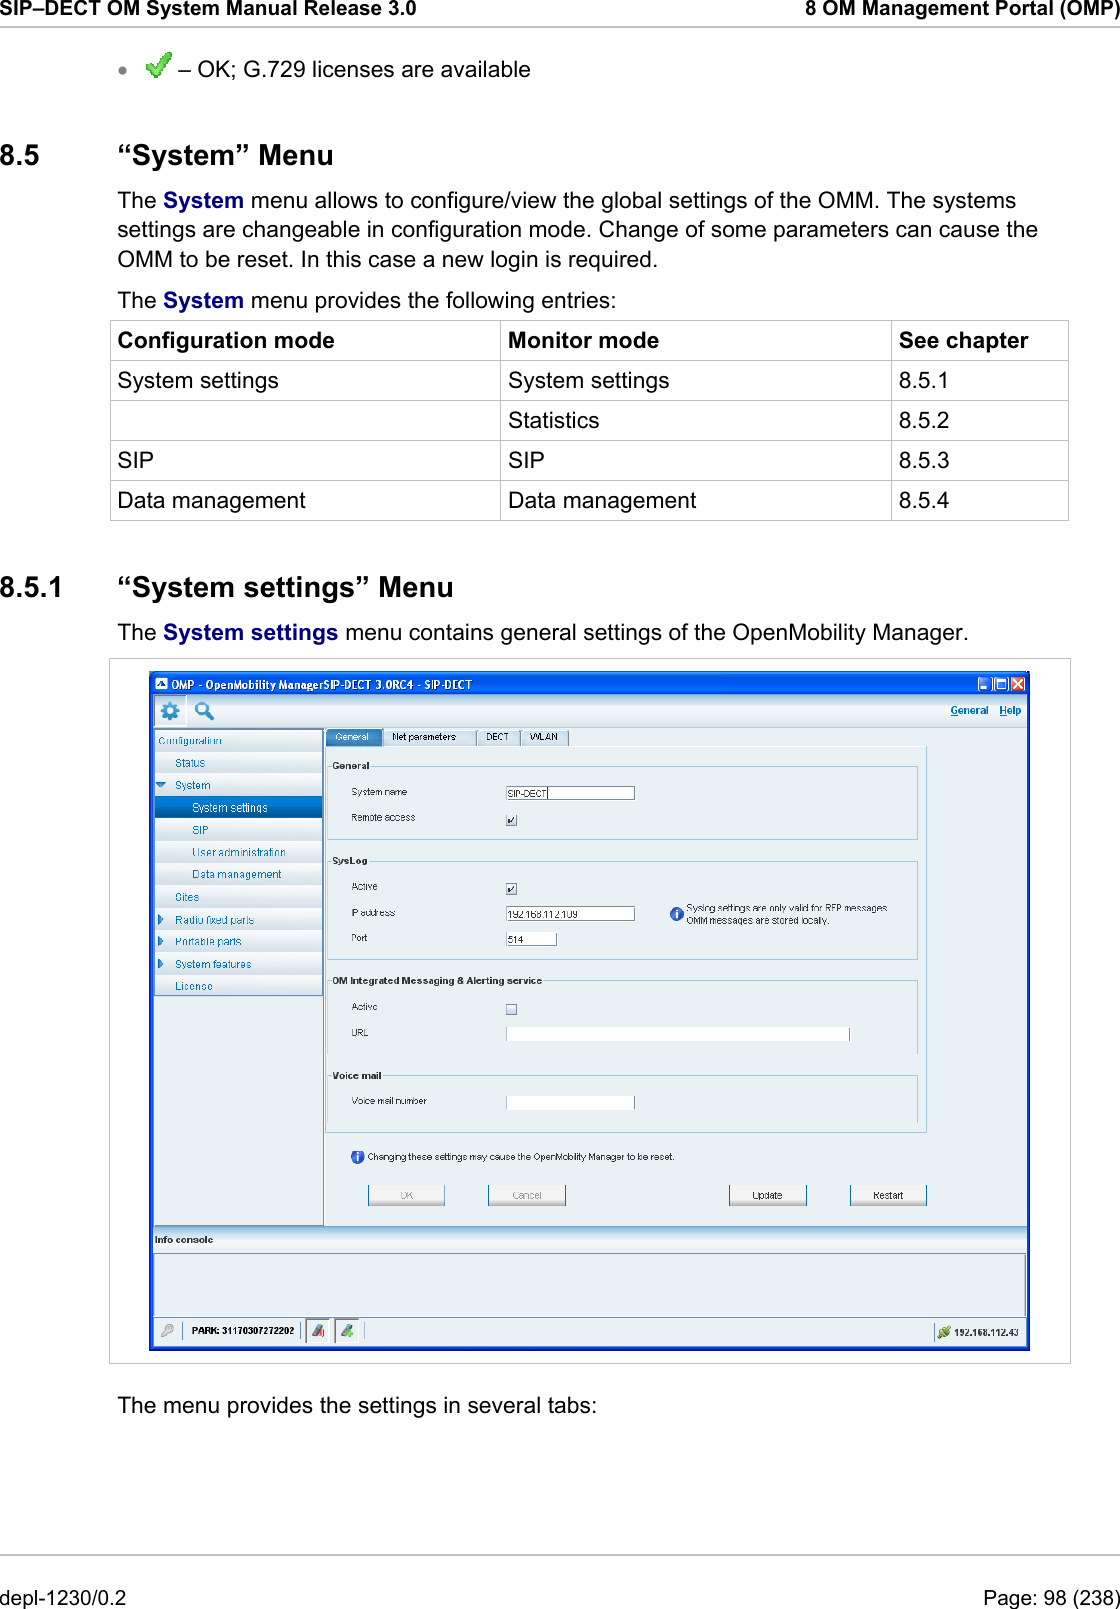 SIP–DECT OM System Manual Release 3.0  8 OM Management Portal (OMP)  – OK; G.729 licenses are available • 8.5 “System” Menu The System menu allows to configure/view the global settings of the OMM. The systems settings are changeable in configuration mode. Change of some parameters can cause the OMM to be reset. In this case a new login is required.  The System menu provides the following entries: Configuration mode  Monitor mode  See chapter System settings  System settings  8.5.1  Statistics 8.5.2 SIP SIP 8.5.3 Data management  Data management  8.5.4 8.5.1 “System settings” Menu The System settings menu contains general settings of the OpenMobility Manager.   The menu provides the settings in several tabs: depl-1230/0.2  Page: 98 (238) 